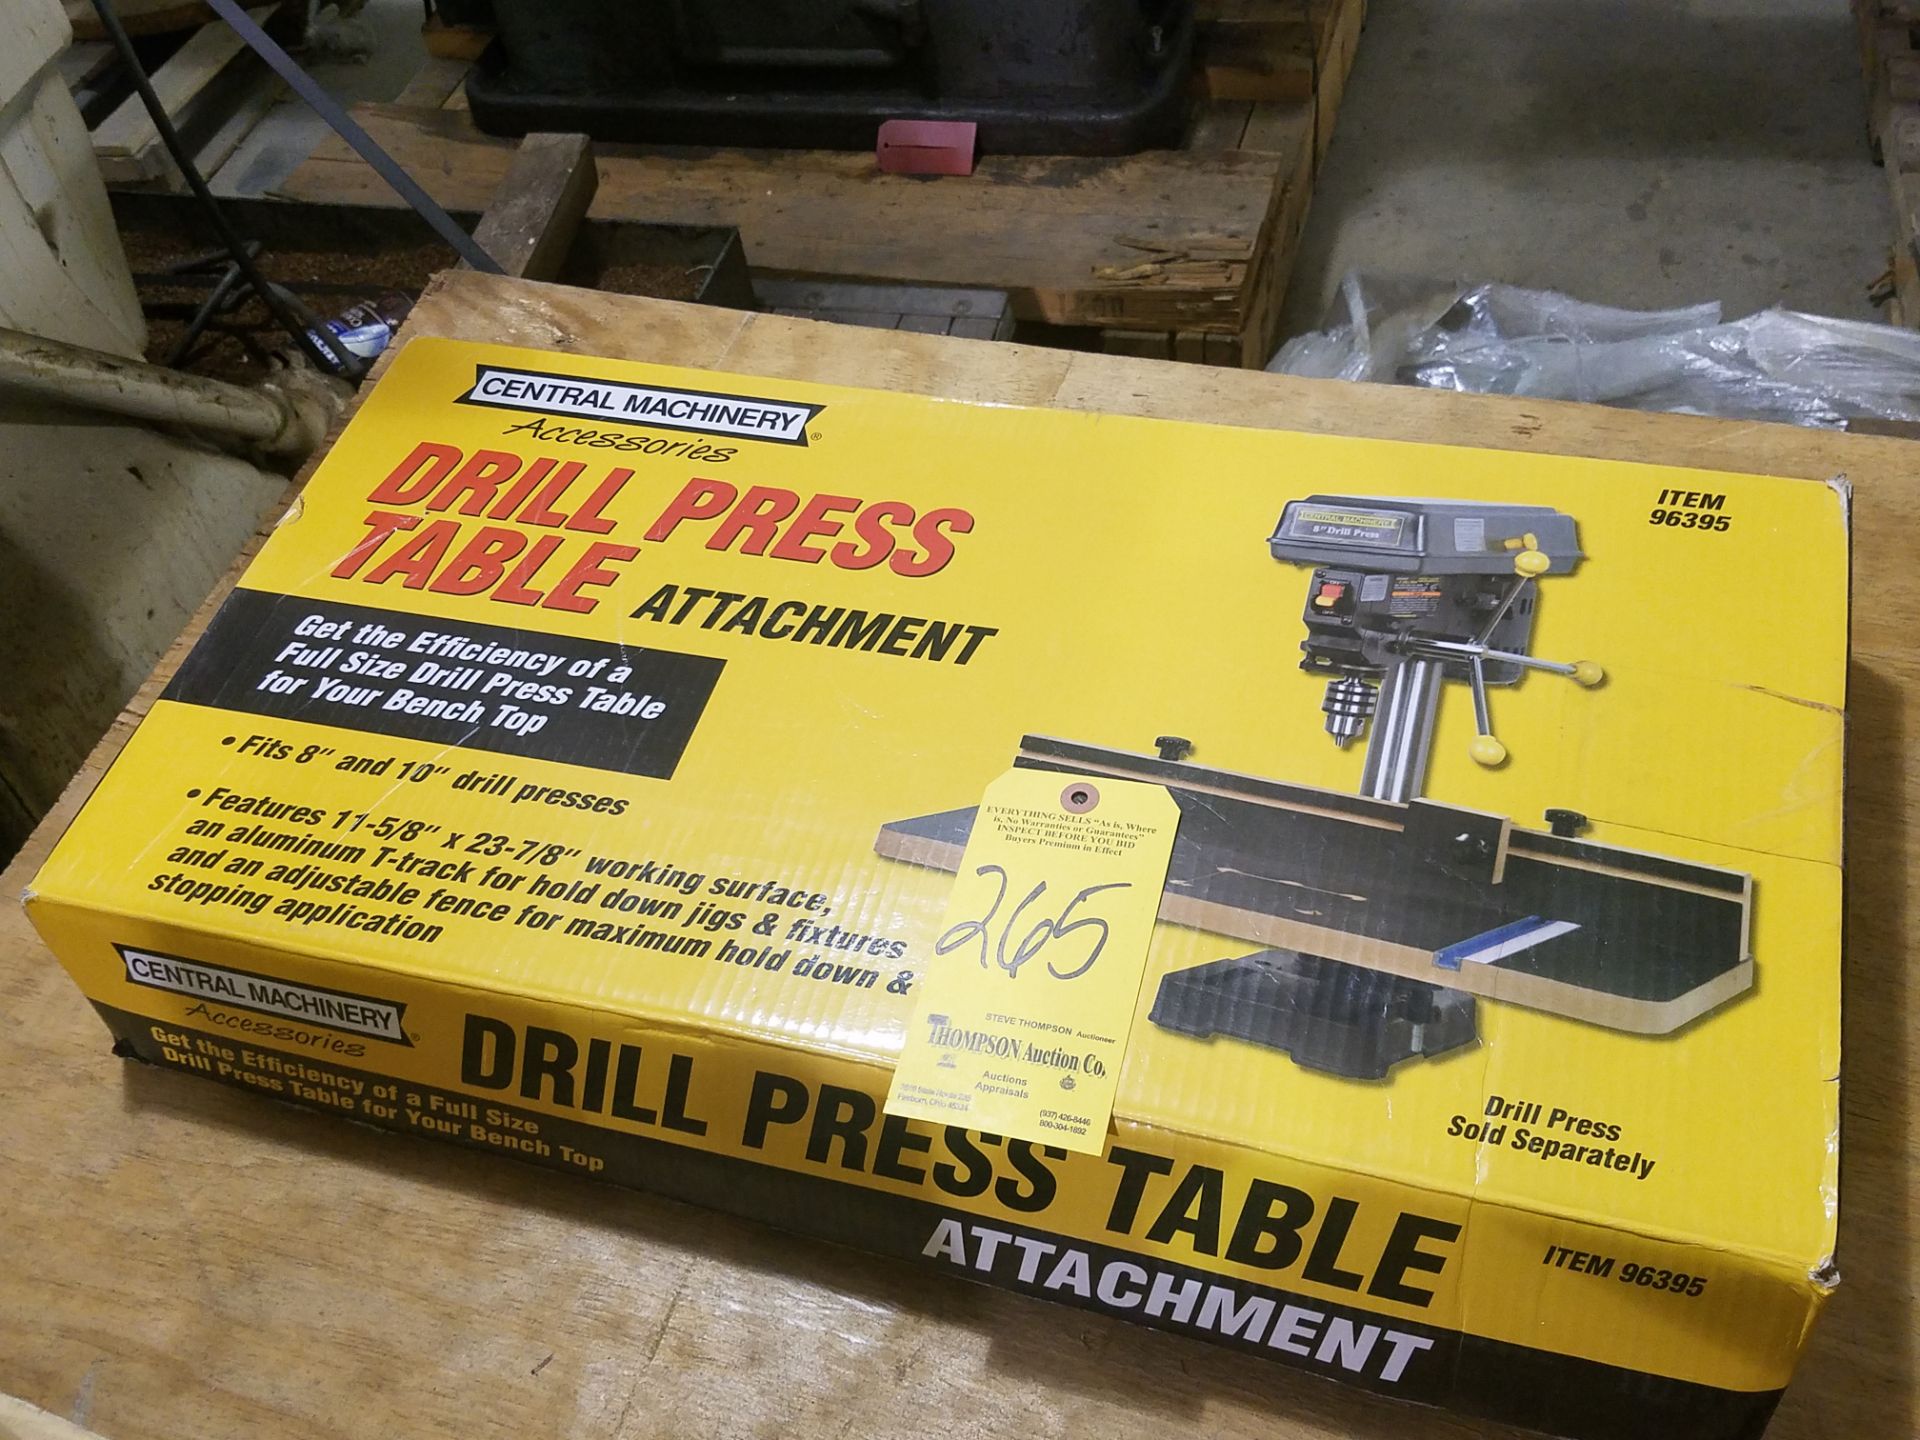 Central Machinery Drill Press Table, New in Box, For 8" and 10" Drill Press